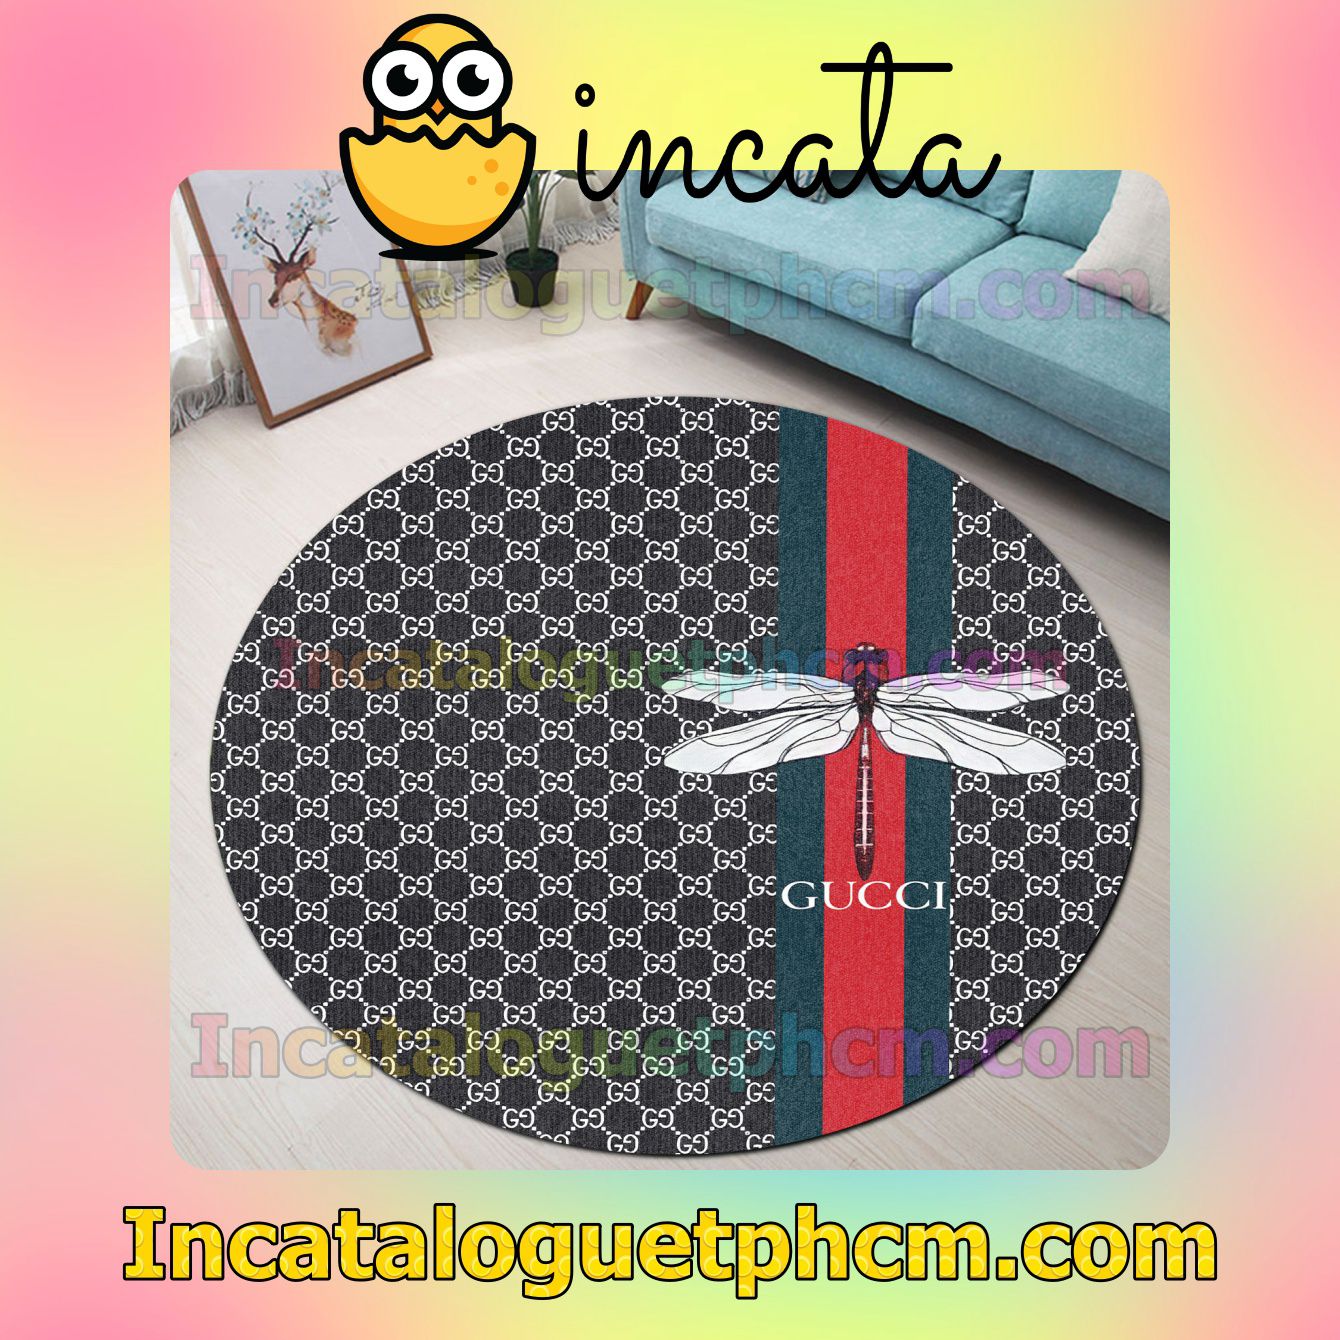 Gucci Dragonfly On Color Stripes Black Monogram Round Carpet Rugs For Kitchen